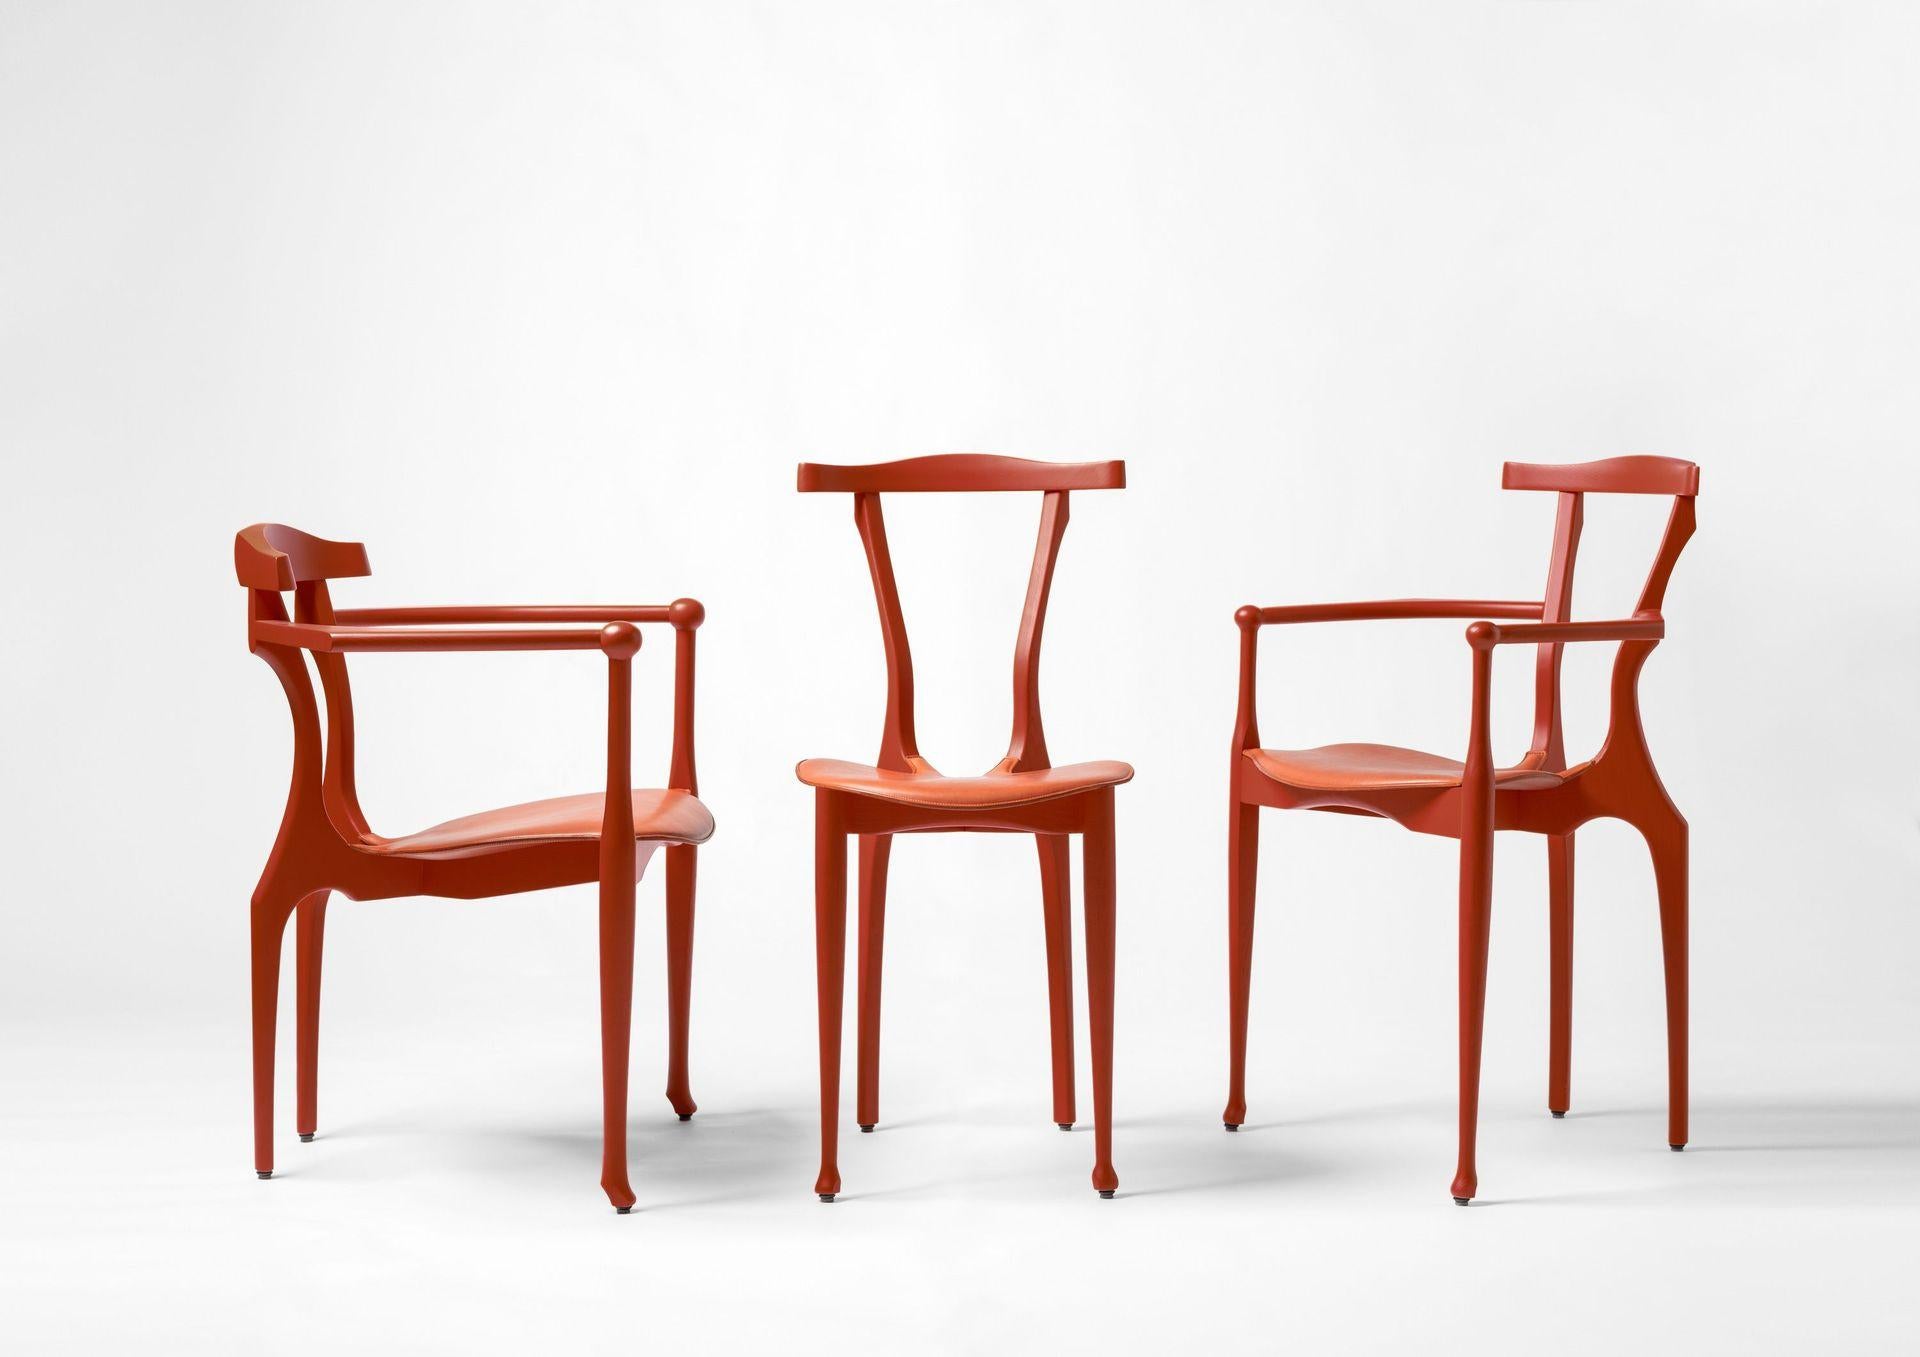 Set of 3 Gaulinetta chairs by Oscar Tusquets
Dimensions: D40 x W52 x H 83 cm.
Materials: ash wood

The Gaulino chair was designed in 1987. BD re-edited it, improving it in 2010. It’s probably one of the best designs by Oscar Tusquets. Even